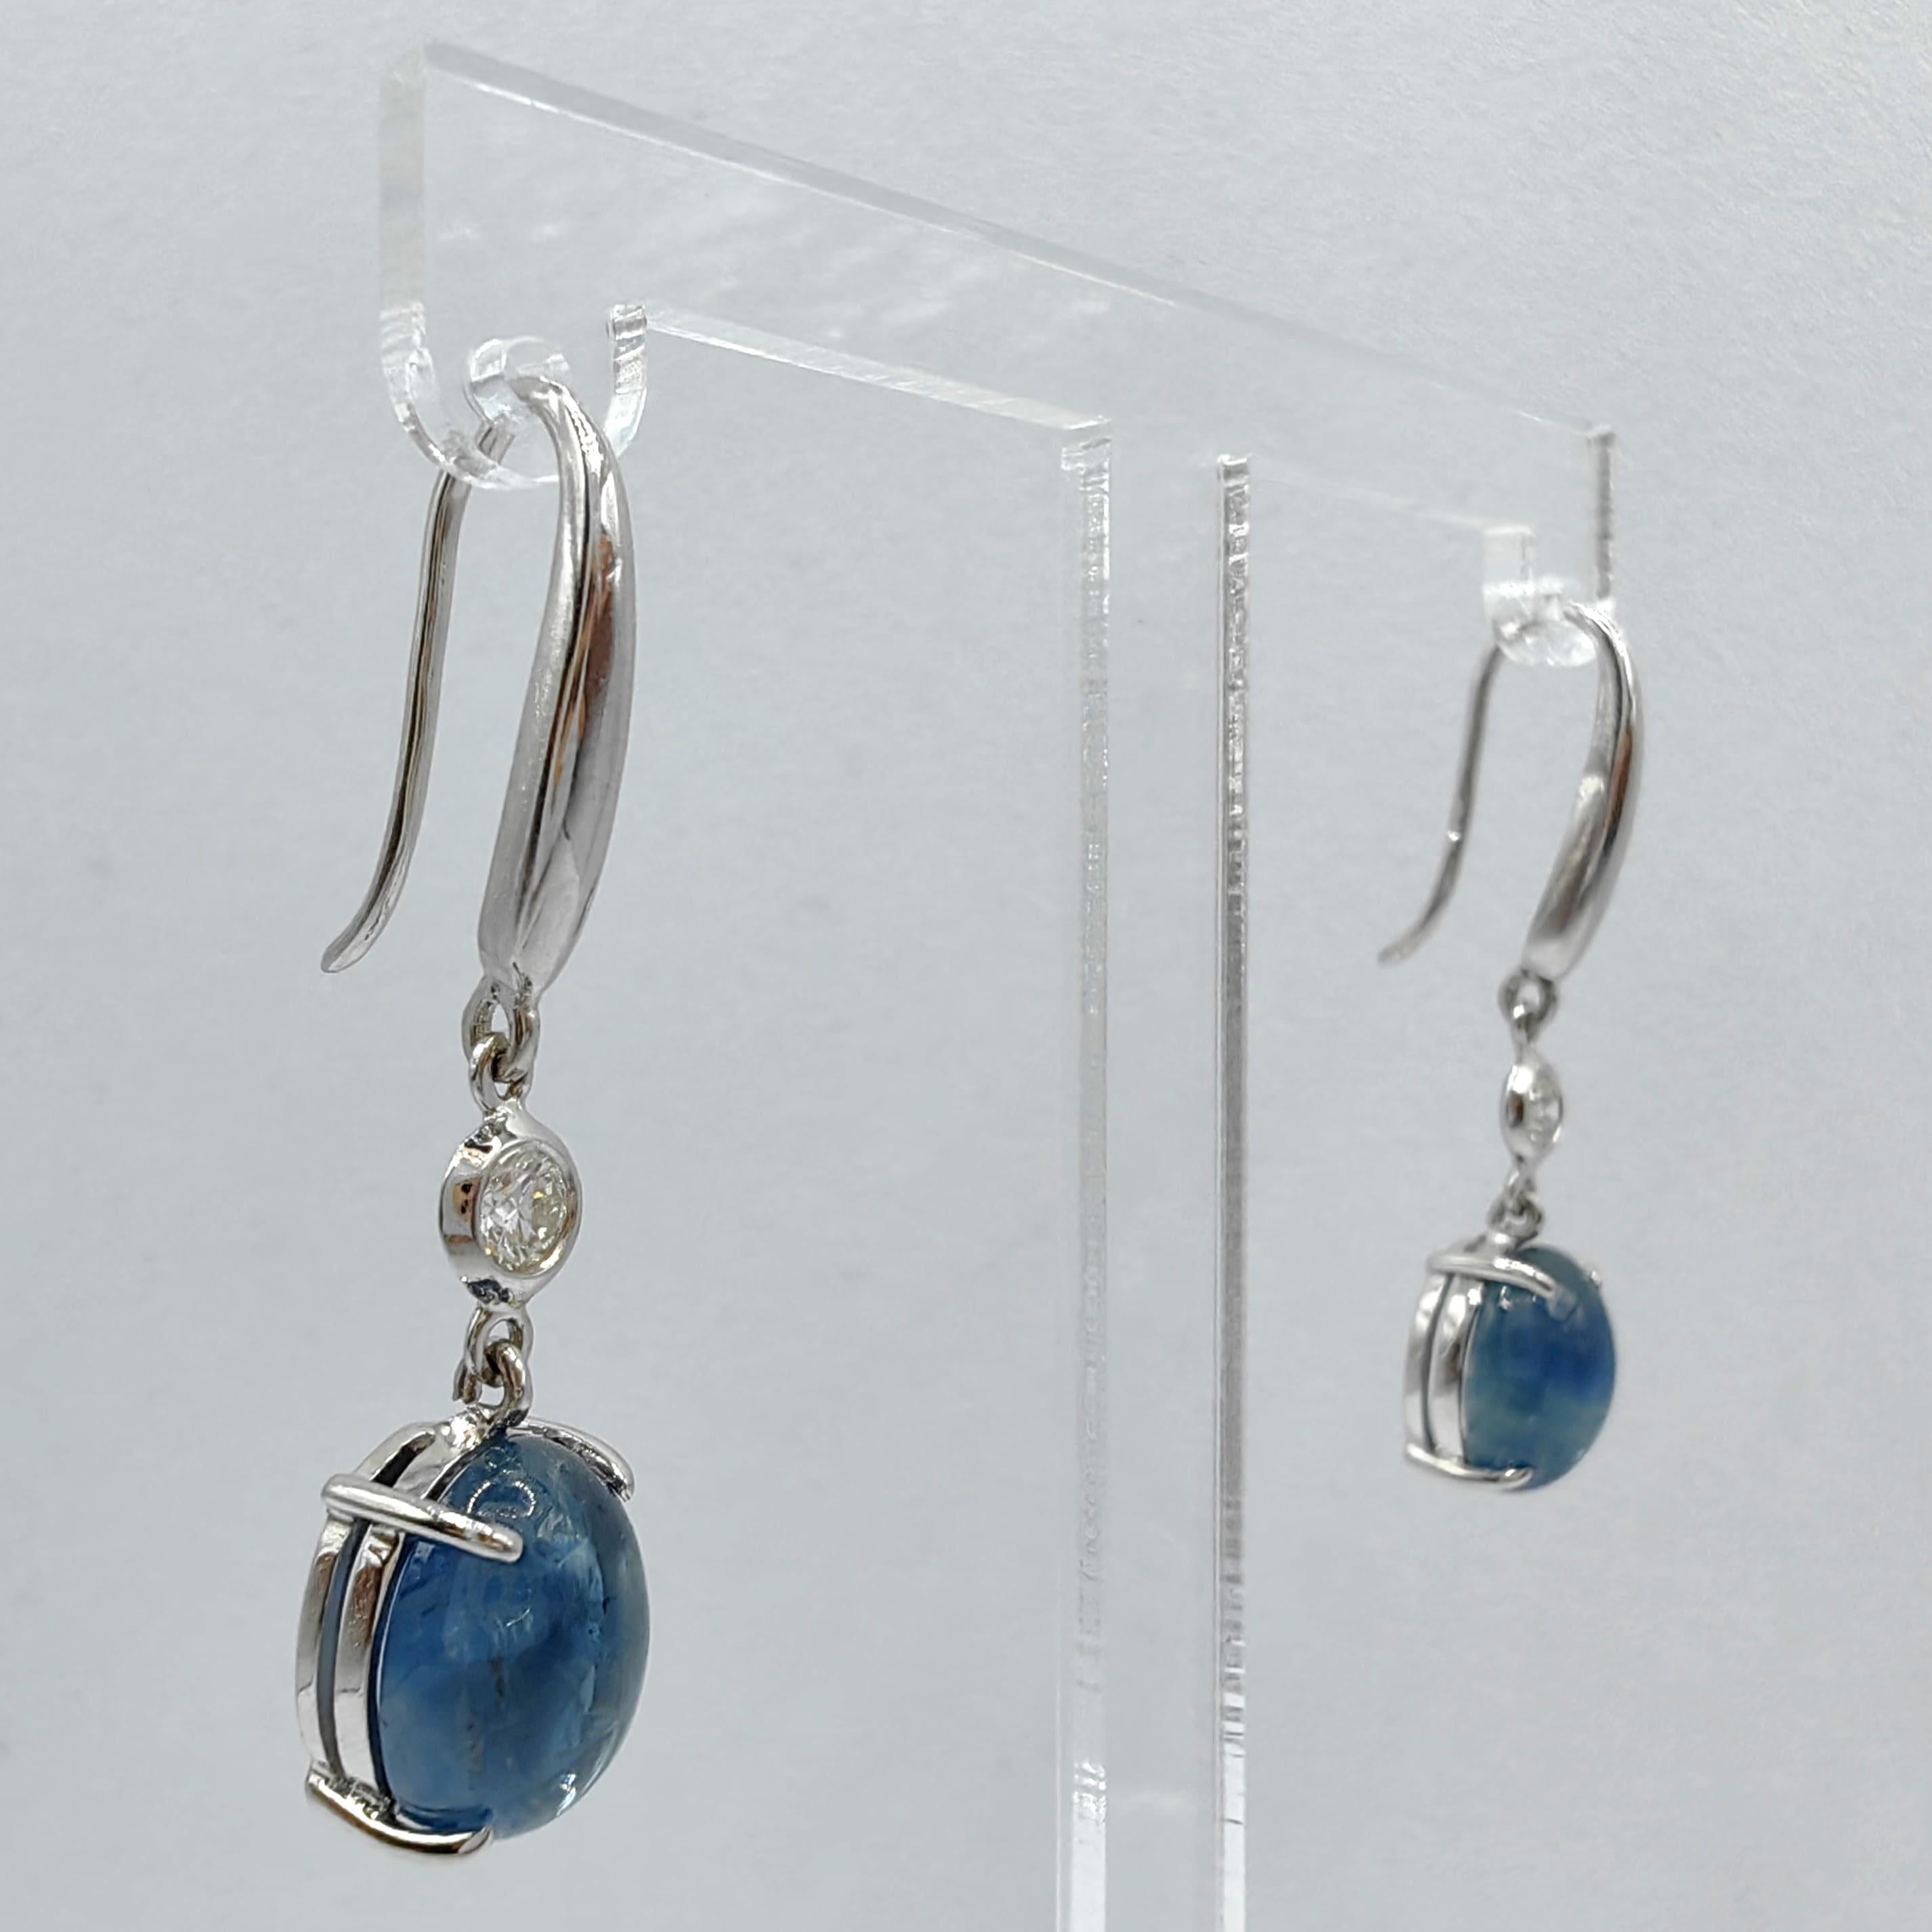 Introducing our exquisite 6.18ct Cabochon Blue Sapphire Diamond Dangling Earrings, where the captivating beauty of blue sapphires and brilliant diamonds takes center stage. 

At the heart of these earrings are two mesmerizing cabochon blue